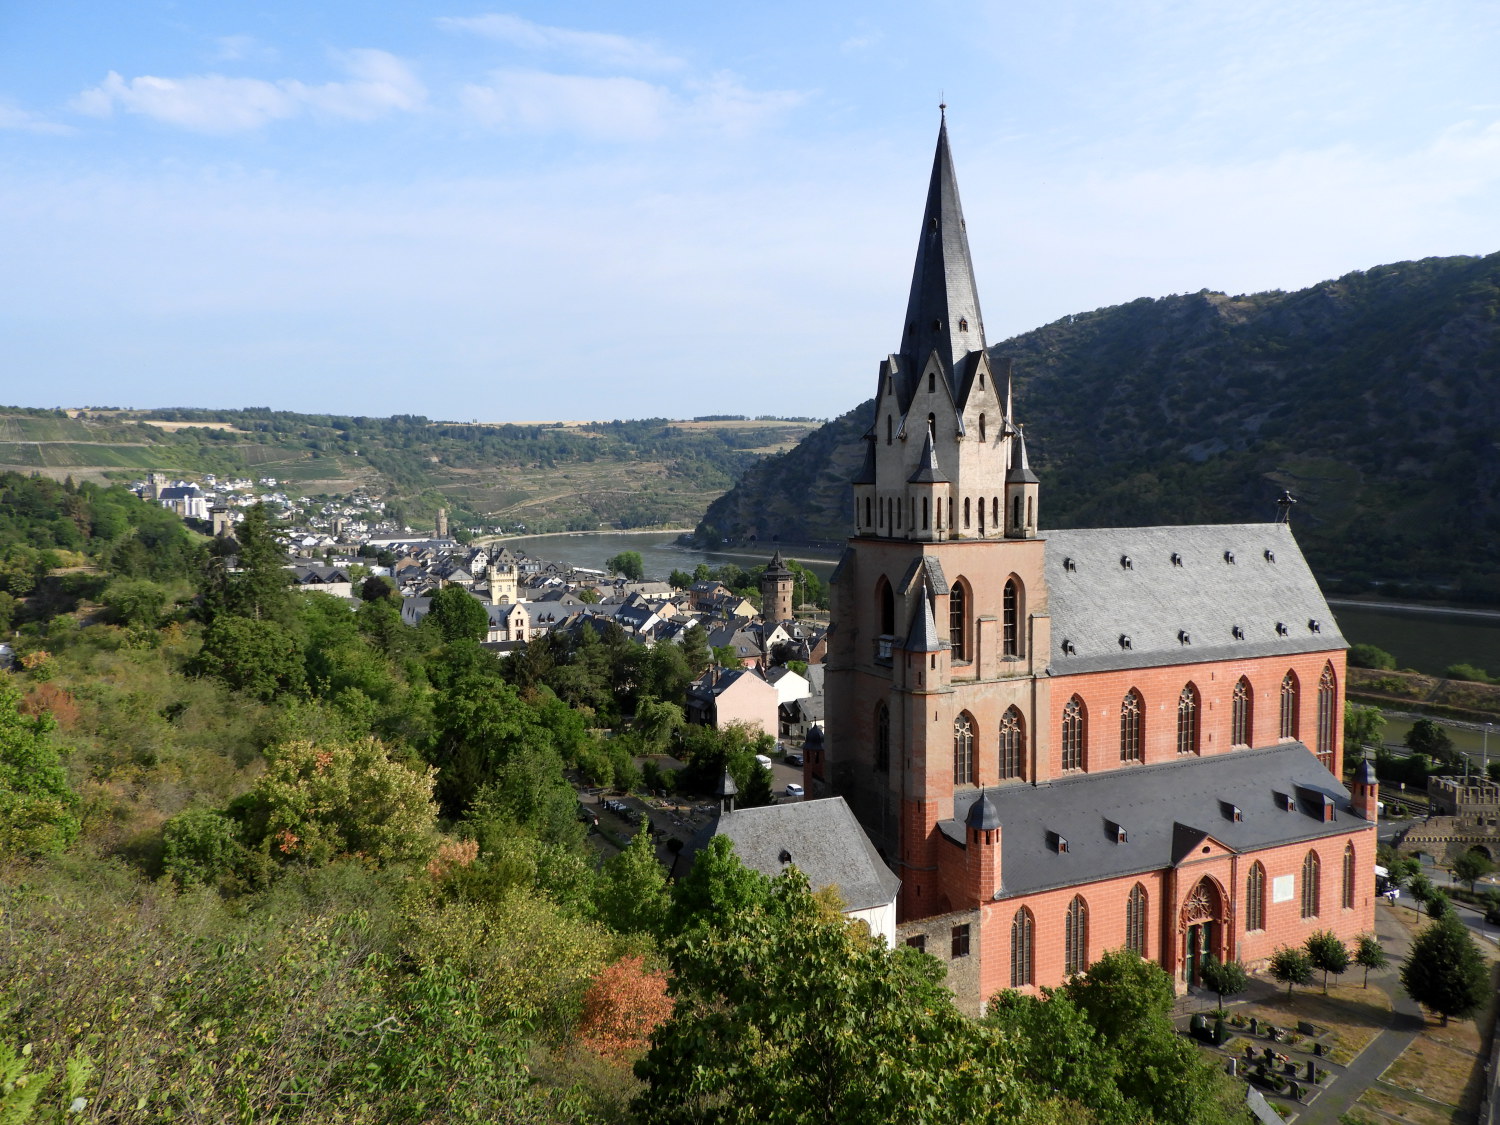 Liebfrauenkirche and Oberwesel